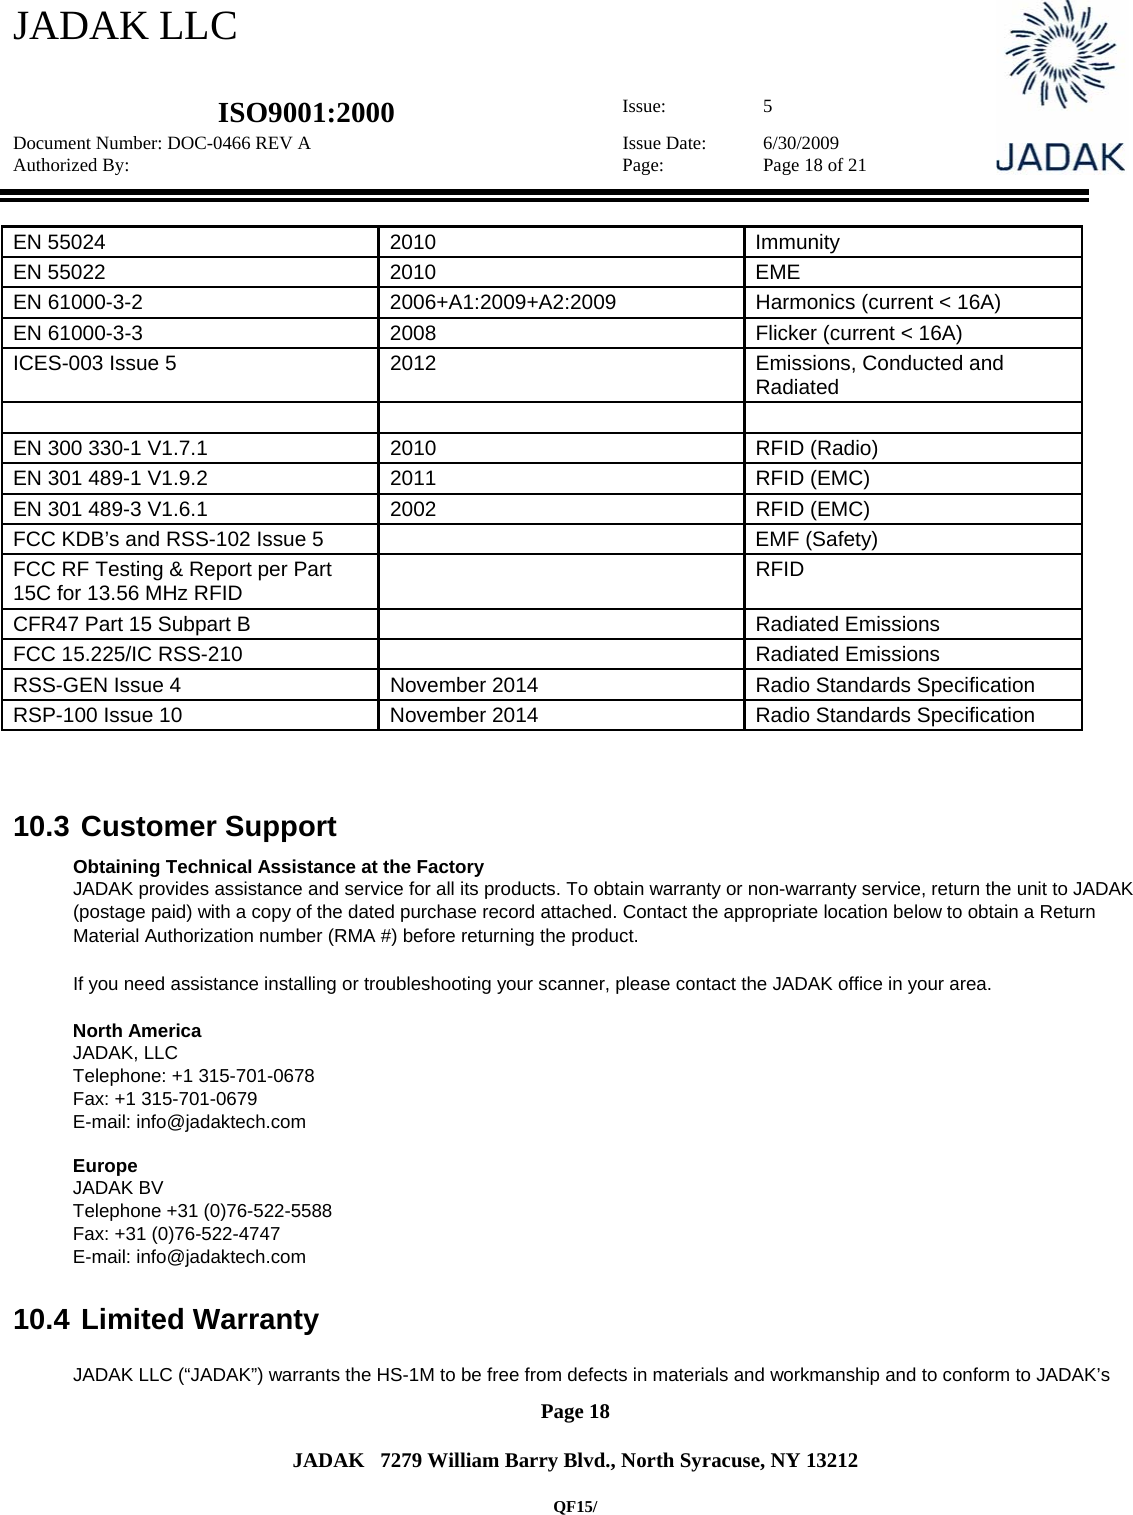 JADAK LLC   ISO9001:2000  Issue: 5 Document Number: DOC-0466 REV A  Issue Date:  6/30/2009 Authorized By:  Page:  Page 18 of 21       Page 18   JADAK   7279 William Barry Blvd., North Syracuse, NY 13212  QF15/ EN 55024  2010  Immunity EN 55022  2010  EME EN 61000-3-2  2006+A1:2009+A2:2009  Harmonics (current &lt; 16A) EN 61000-3-3  2008  Flicker (current &lt; 16A) ICES-003 Issue 5  2012  Emissions, Conducted and Radiated    EN 300 330-1 V1.7.1  2010  RFID (Radio)  EN 301 489-1 V1.9.2  2011  RFID (EMC)  EN 301 489-3 V1.6.1  2002  RFID (EMC)  FCC KDB’s and RSS-102 Issue 5    EMF (Safety) FCC RF Testing &amp; Report per Part 15C for 13.56 MHz RFID  RFID CFR47 Part 15 Subpart B    Radiated Emissions FCC 15.225/IC RSS-210    Radiated Emissions RSS-GEN Issue 4  November 2014  Radio Standards Specification RSP-100 Issue 10  November 2014  Radio Standards Specification    10.3  Customer Support Obtaining Technical Assistance at the Factory JADAK provides assistance and service for all its products. To obtain warranty or non-warranty service, return the unit to JADAK (postage paid) with a copy of the dated purchase record attached. Contact the appropriate location below to obtain a Return Material Authorization number (RMA #) before returning the product.  If you need assistance installing or troubleshooting your scanner, please contact the JADAK office in your area.  North America JADAK, LLC  Telephone: +1 315-701-0678  Fax: +1 315-701-0679  E-mail: info@jadaktech.com  Europe JADAK BV  Telephone +31 (0)76-522-5588  Fax: +31 (0)76-522-4747  E-mail: info@jadaktech.com  10.4  Limited Warranty  JADAK LLC (“JADAK”) warrants the HS-1M to be free from defects in materials and workmanship and to conform to JADAK’s 